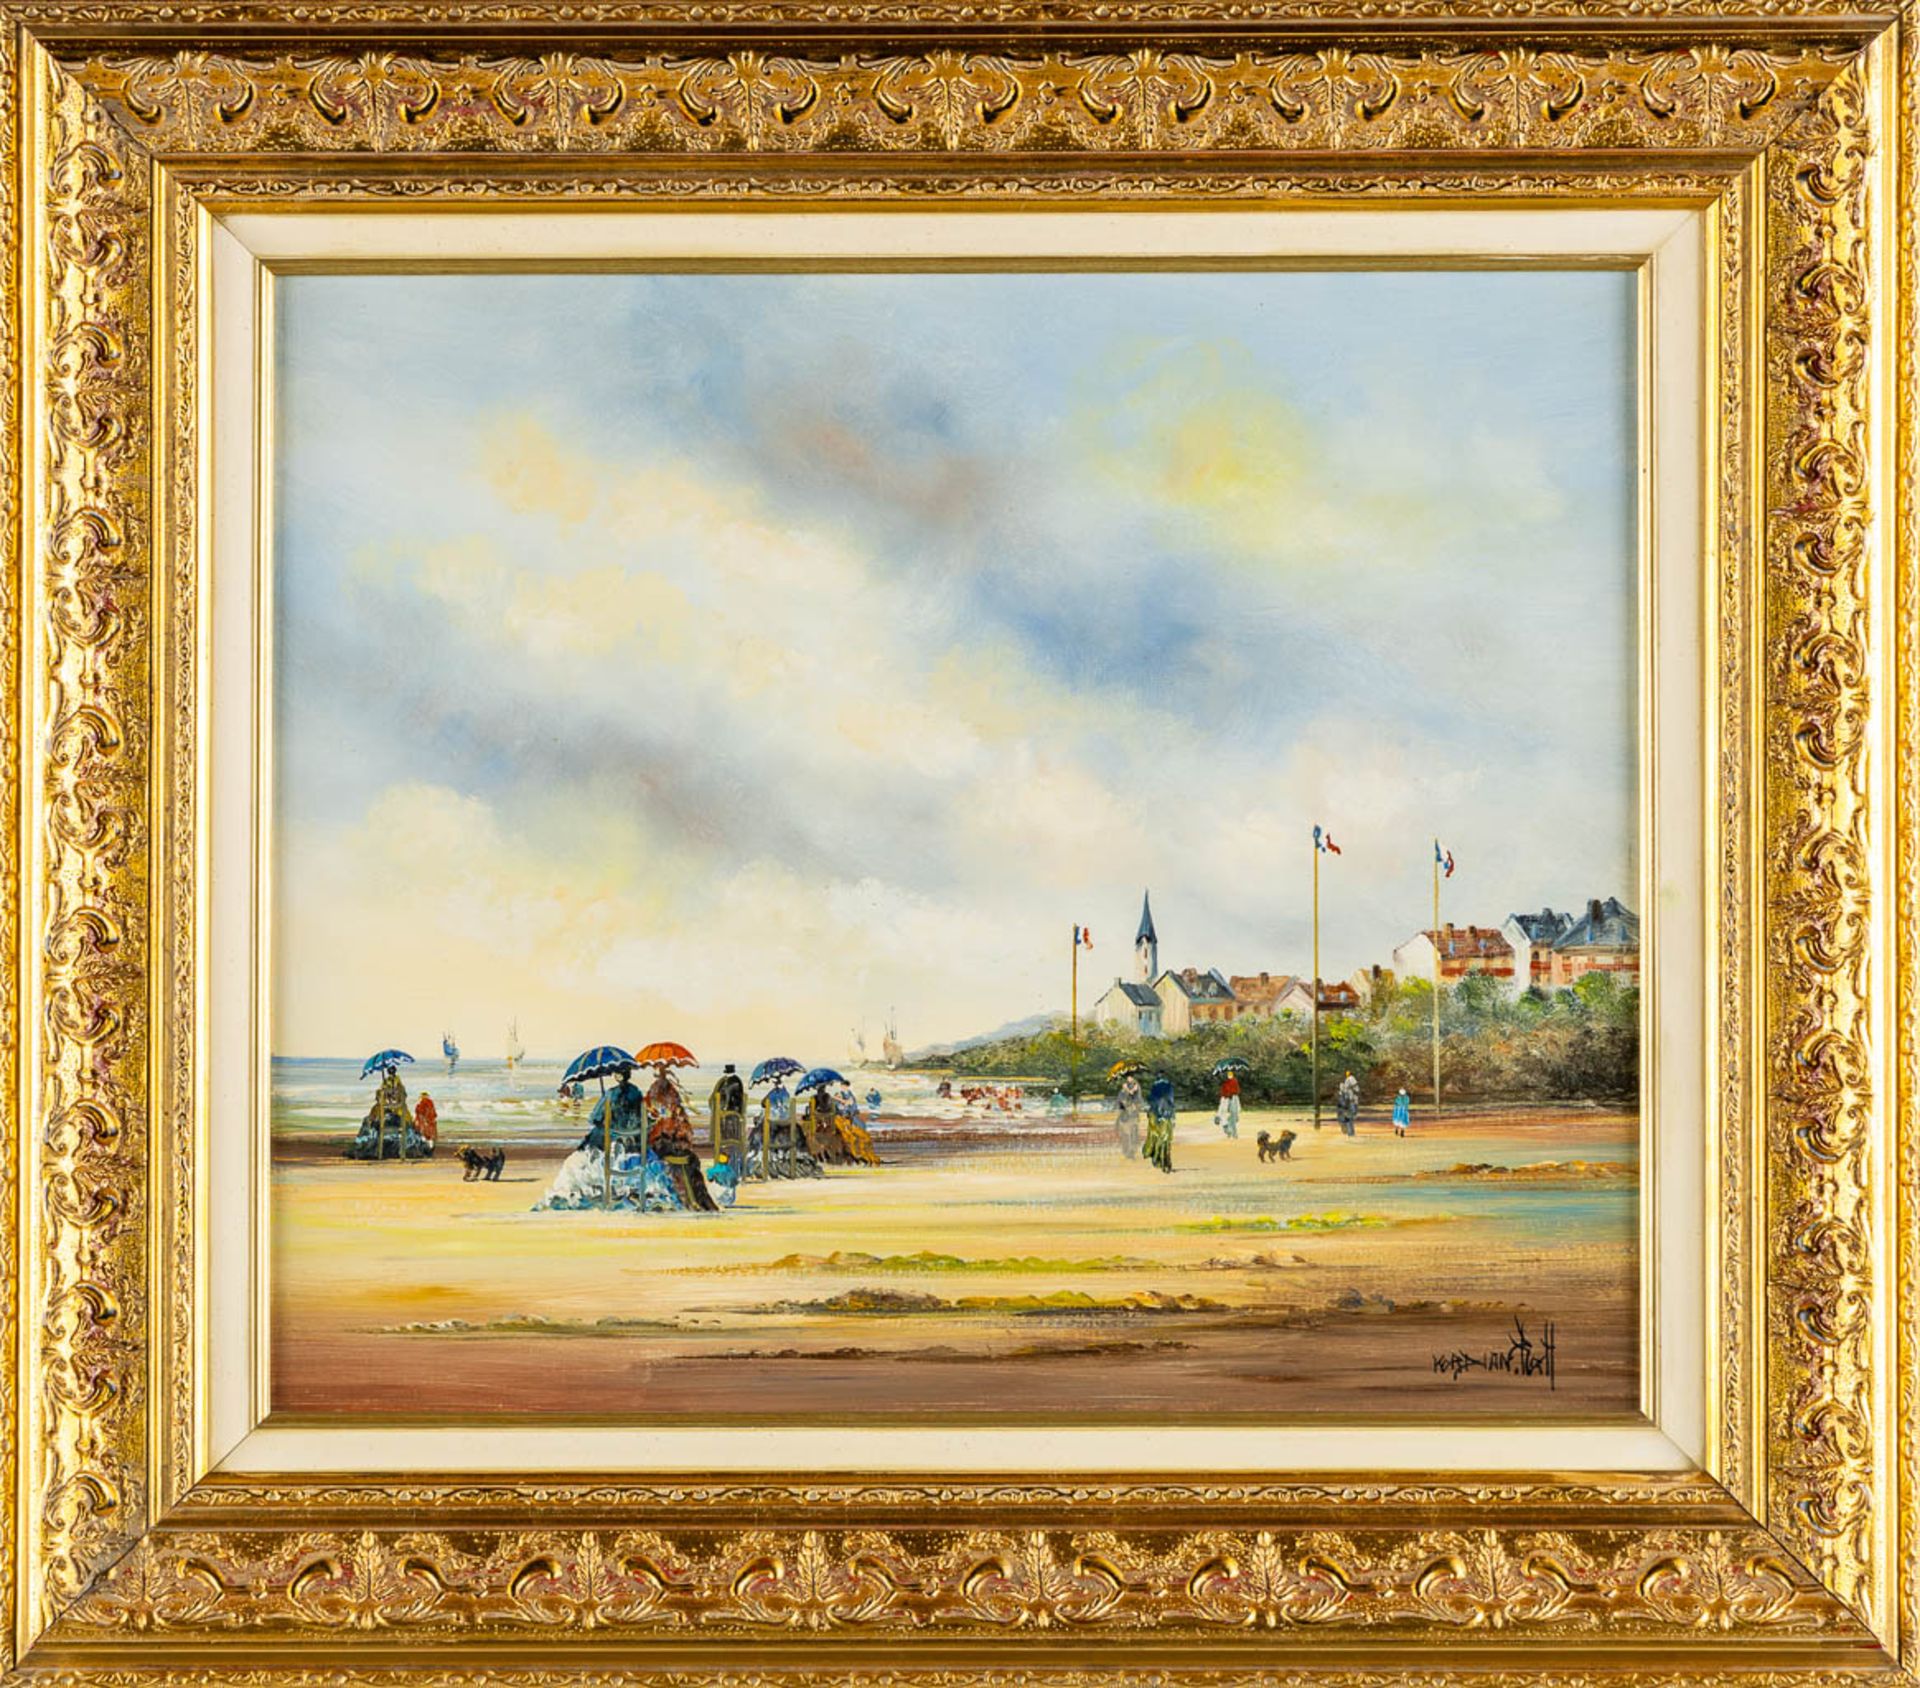 Roch KORDIAN (1950) 'View of the beach' oil on canvas. (W:55 x H:46 cm) - Image 3 of 8